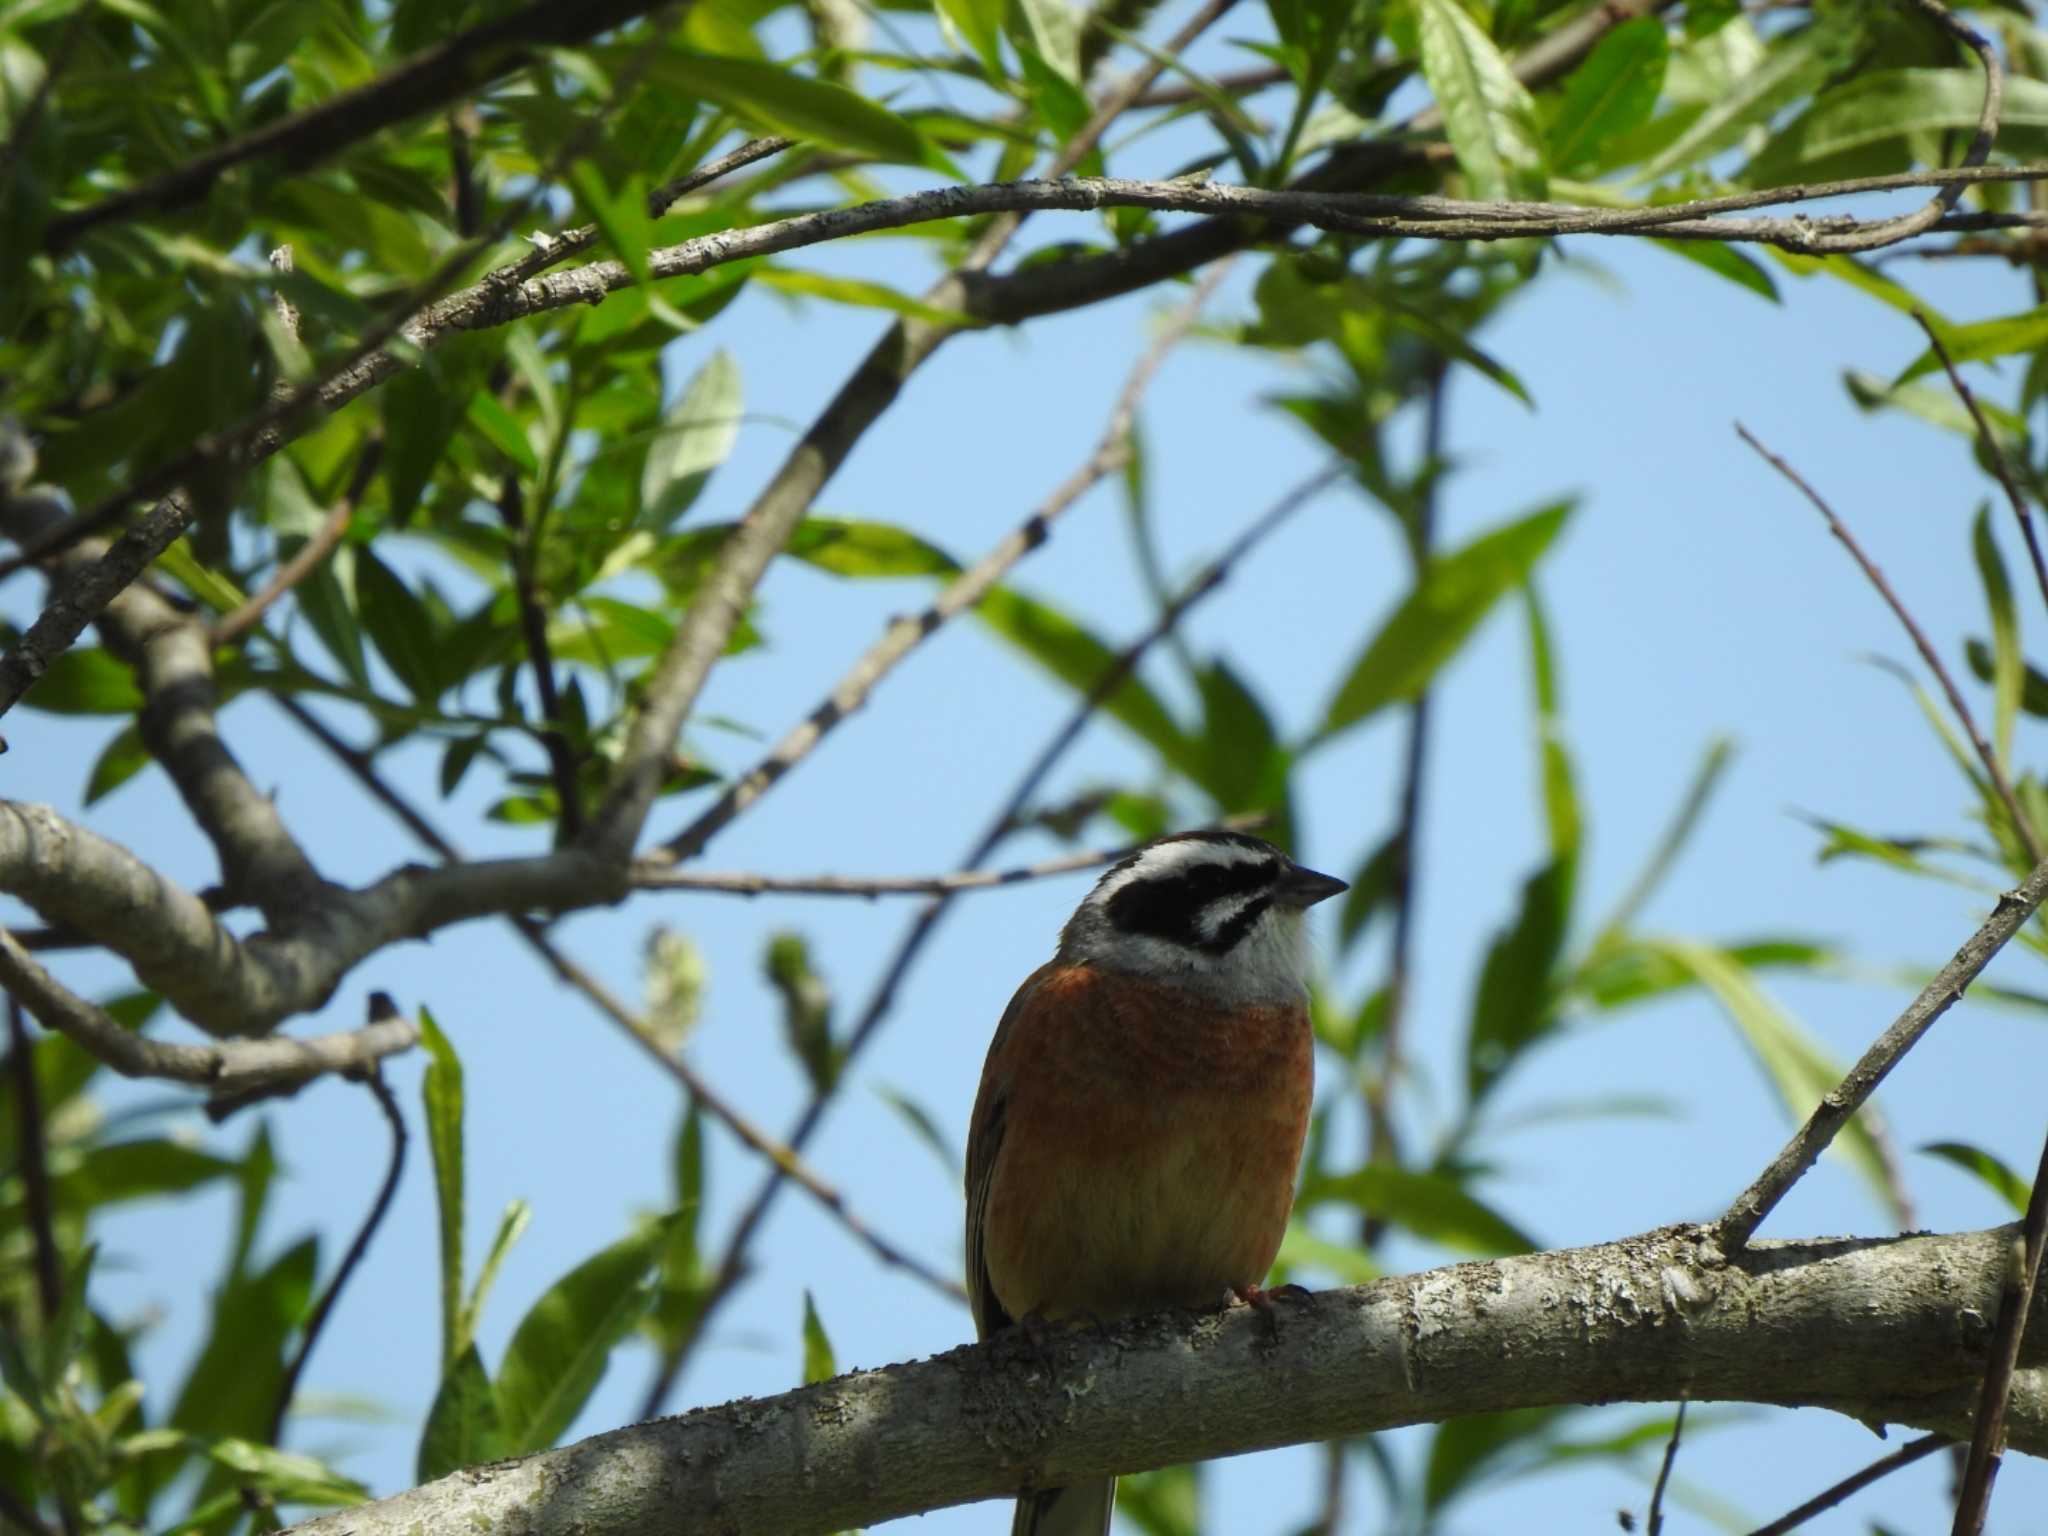 Photo of Meadow Bunting at 十勝エコロジーパーク by ノビタキ王国の住民 